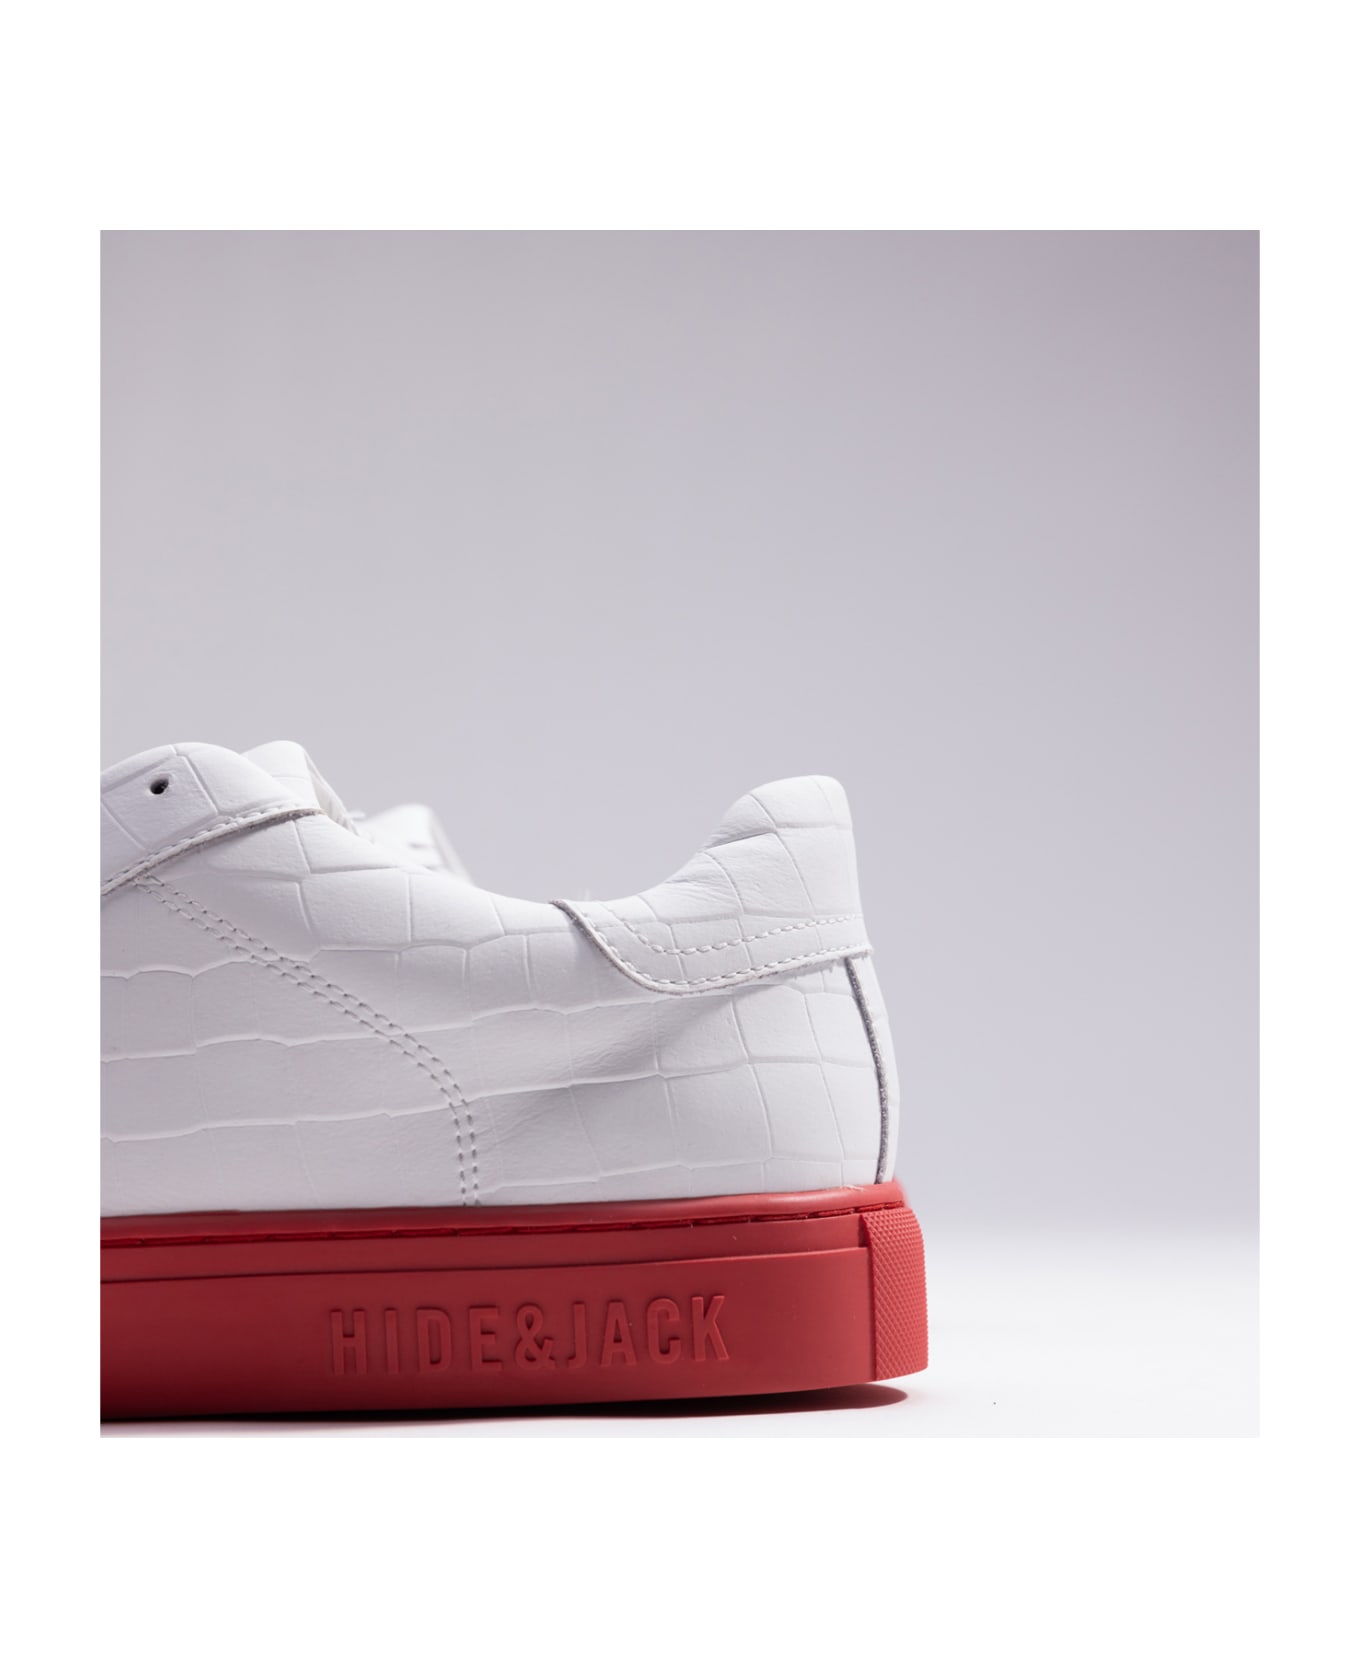 Hide&Jack Low Top Sneaker - Essence Tuscany White Red スニーカー